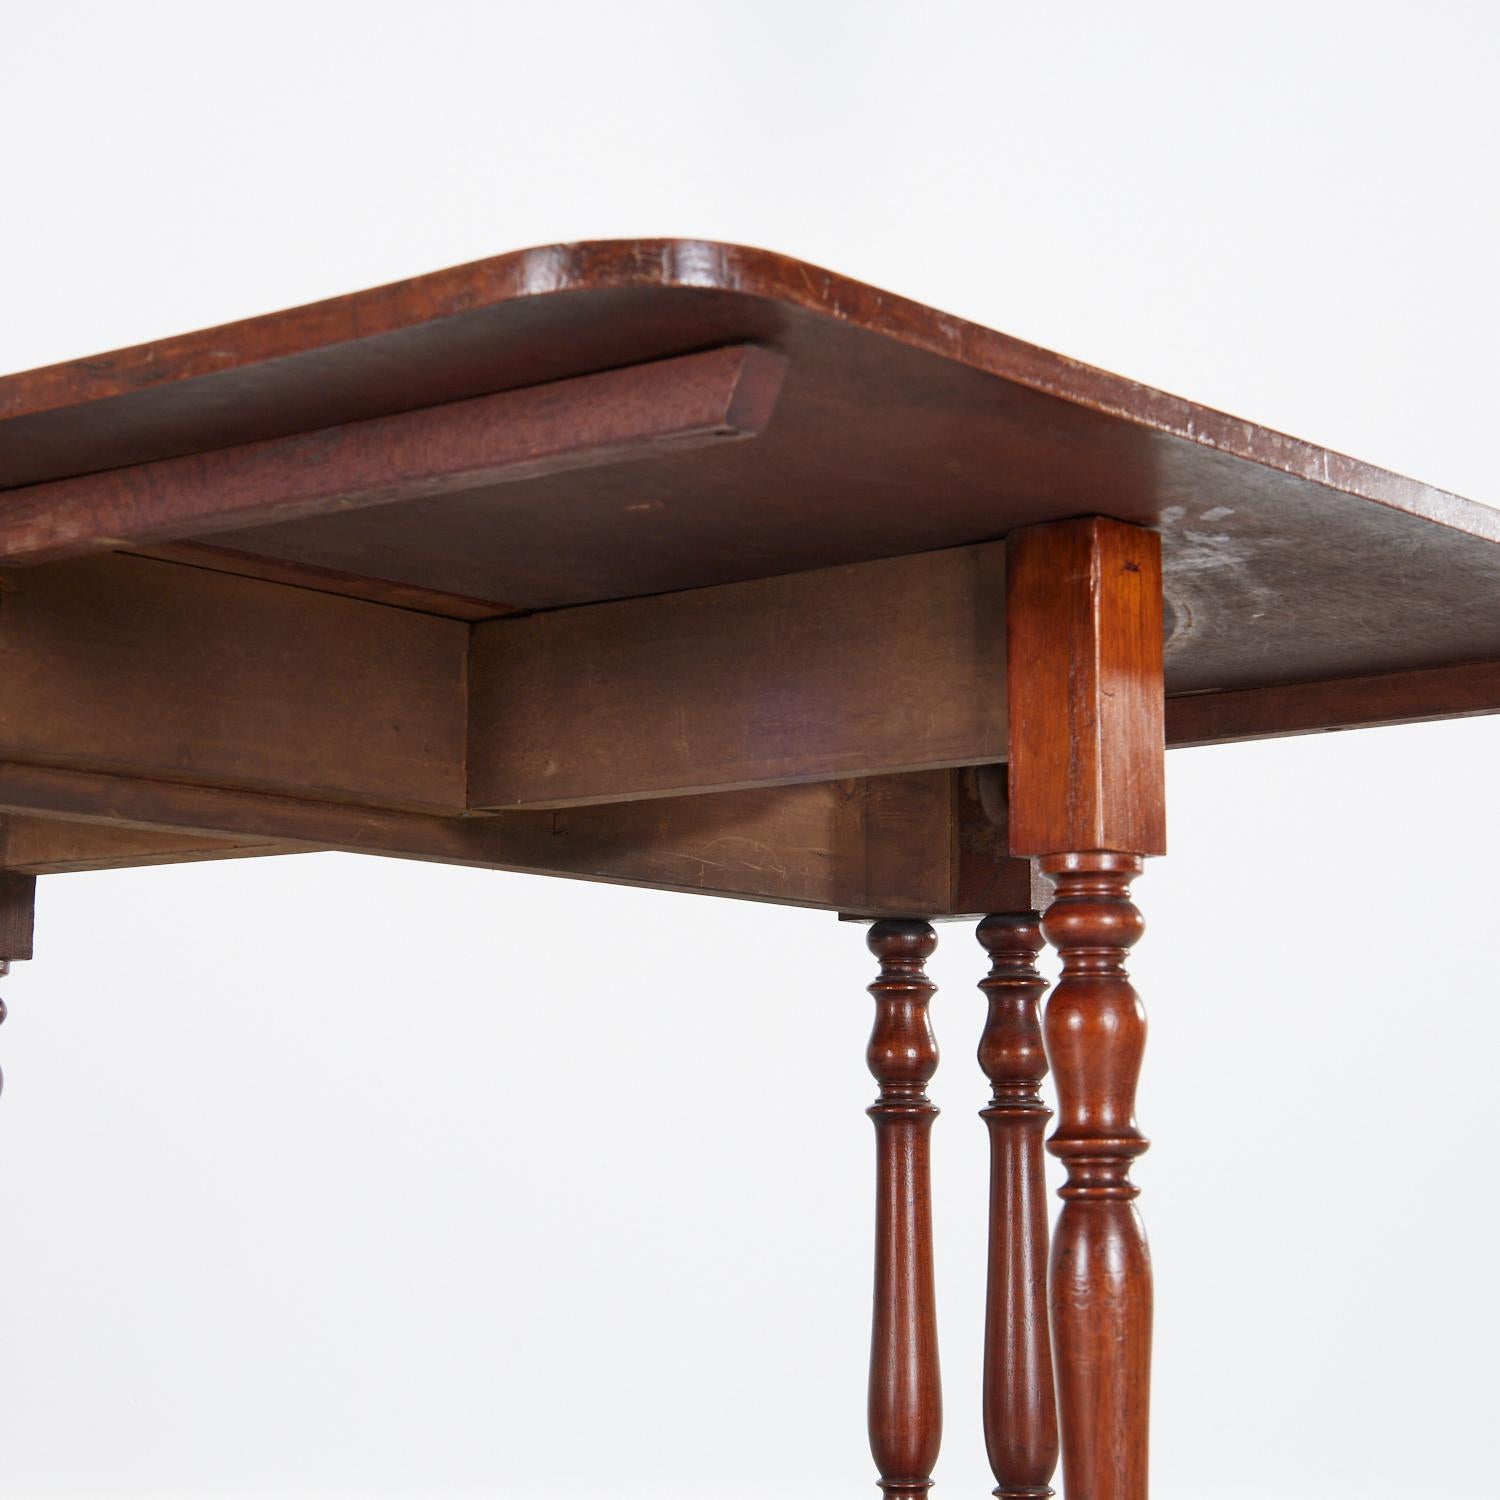 19th Century 19th C. Victorian Walnut Sutherland Drop Leaf Table with Turned Baluster Legs For Sale